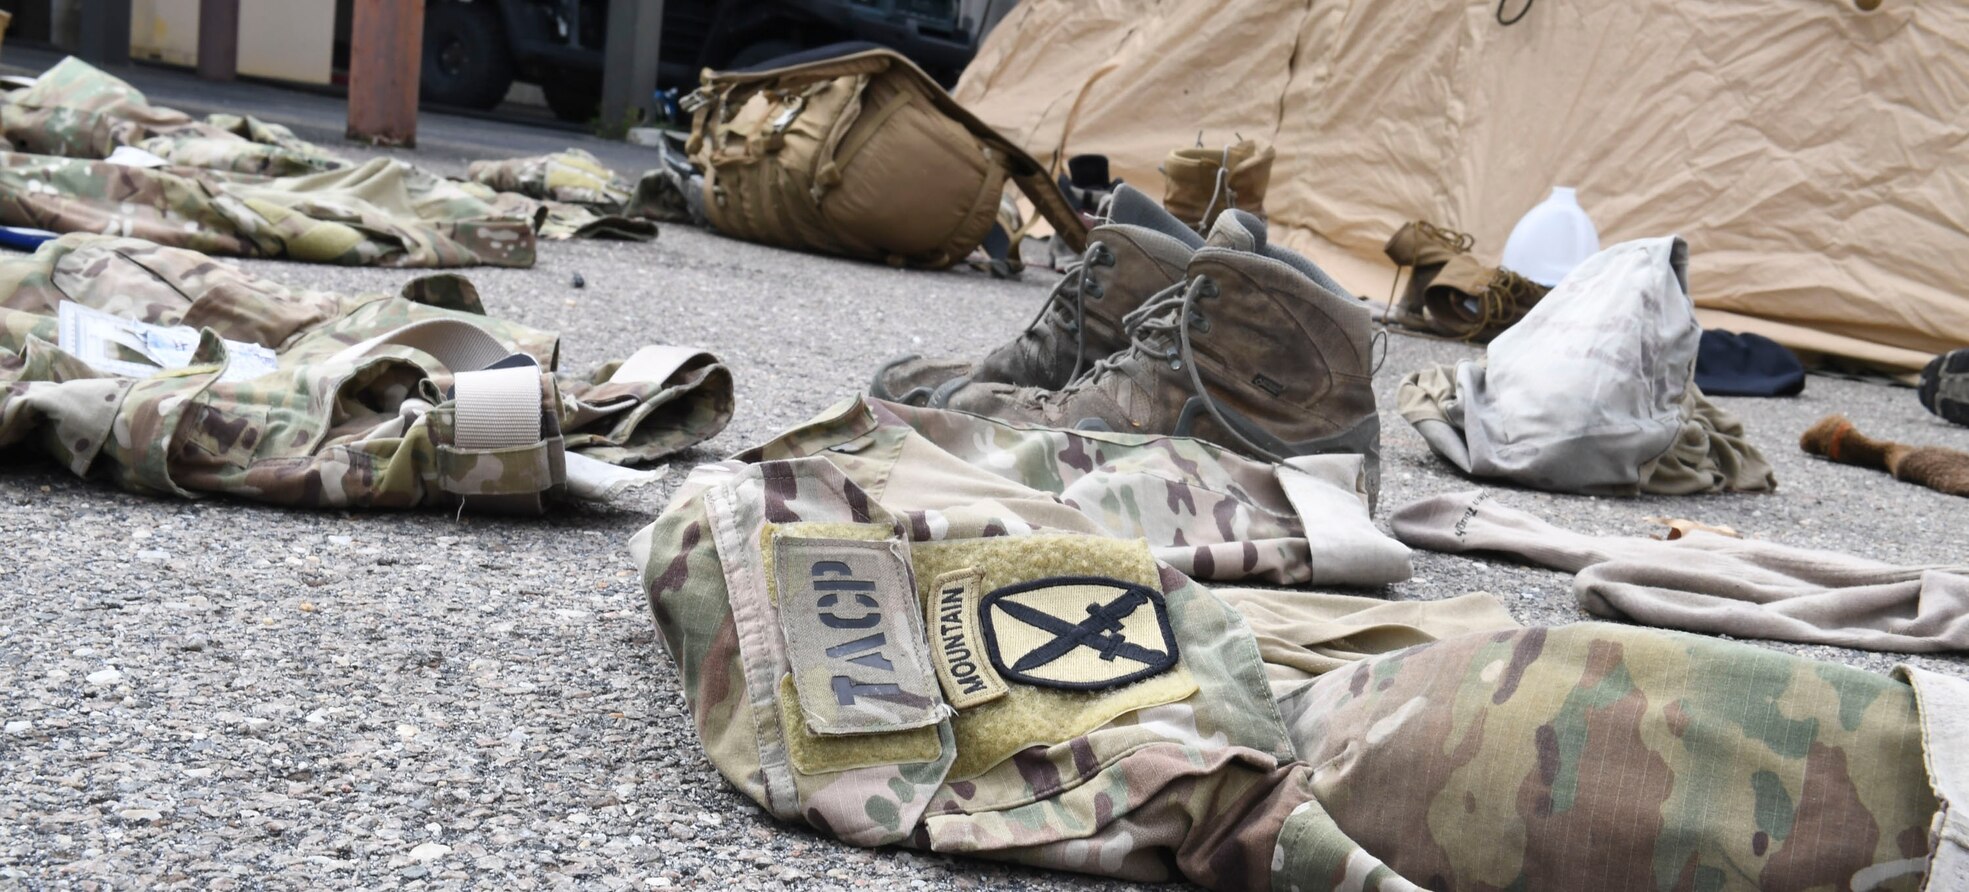 Dragon Challenge 2018 competitors leave their clothes out to dry in the sun after a 12-mile ruck march at Fort Bragg, North Carolina, Nov. 1, 2018. The competitors were so sweaty after the ruck march that they needed to let their clothes dry before the next event later that day. (U.S. Air Force photo by 1st Lt. Faith Brodkorb)